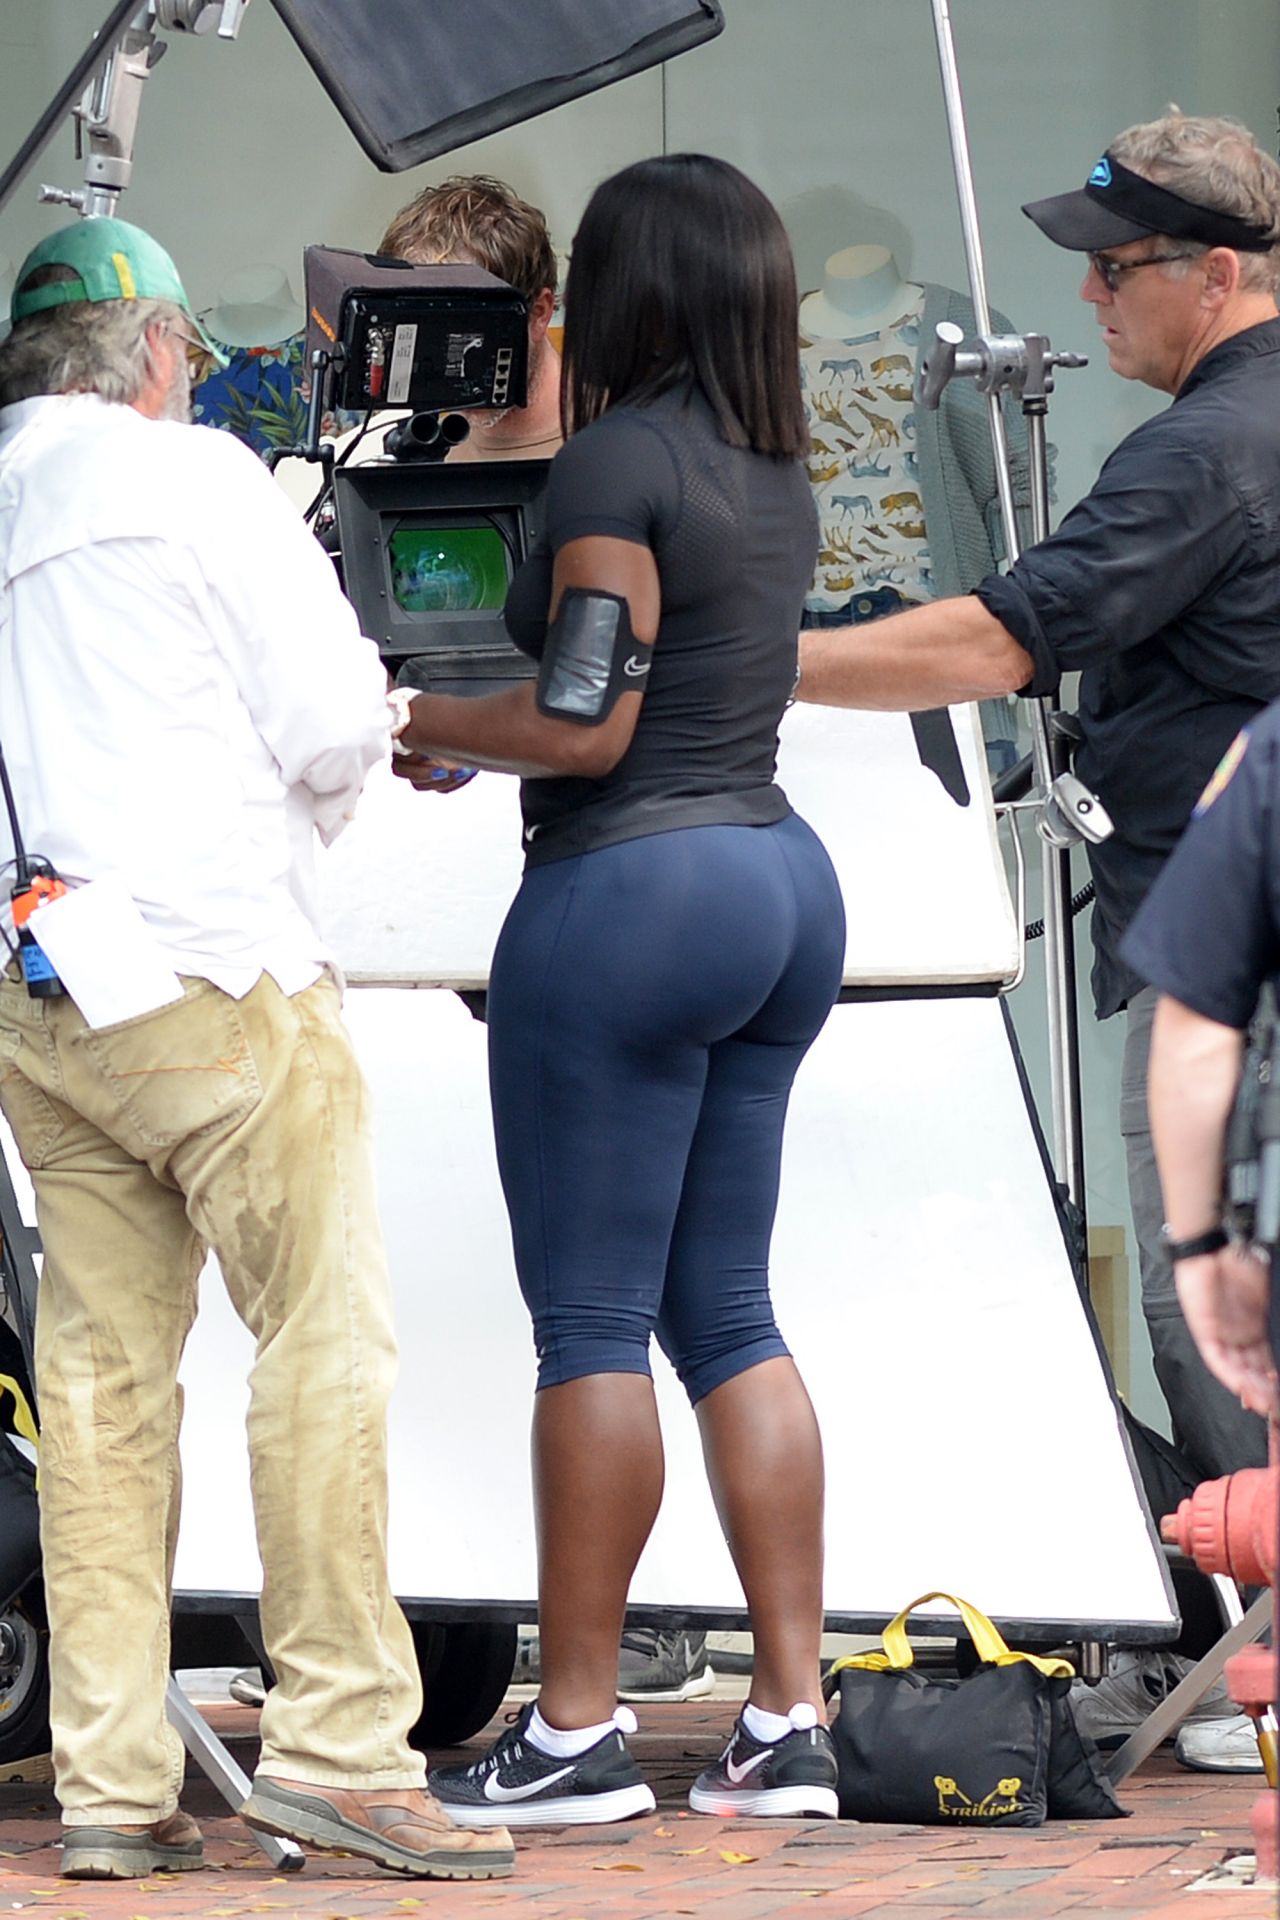 Serena Williams Shows Off Her Famous Curves in Tight Workout Gear - Florida 4/4/20161280 x 1920